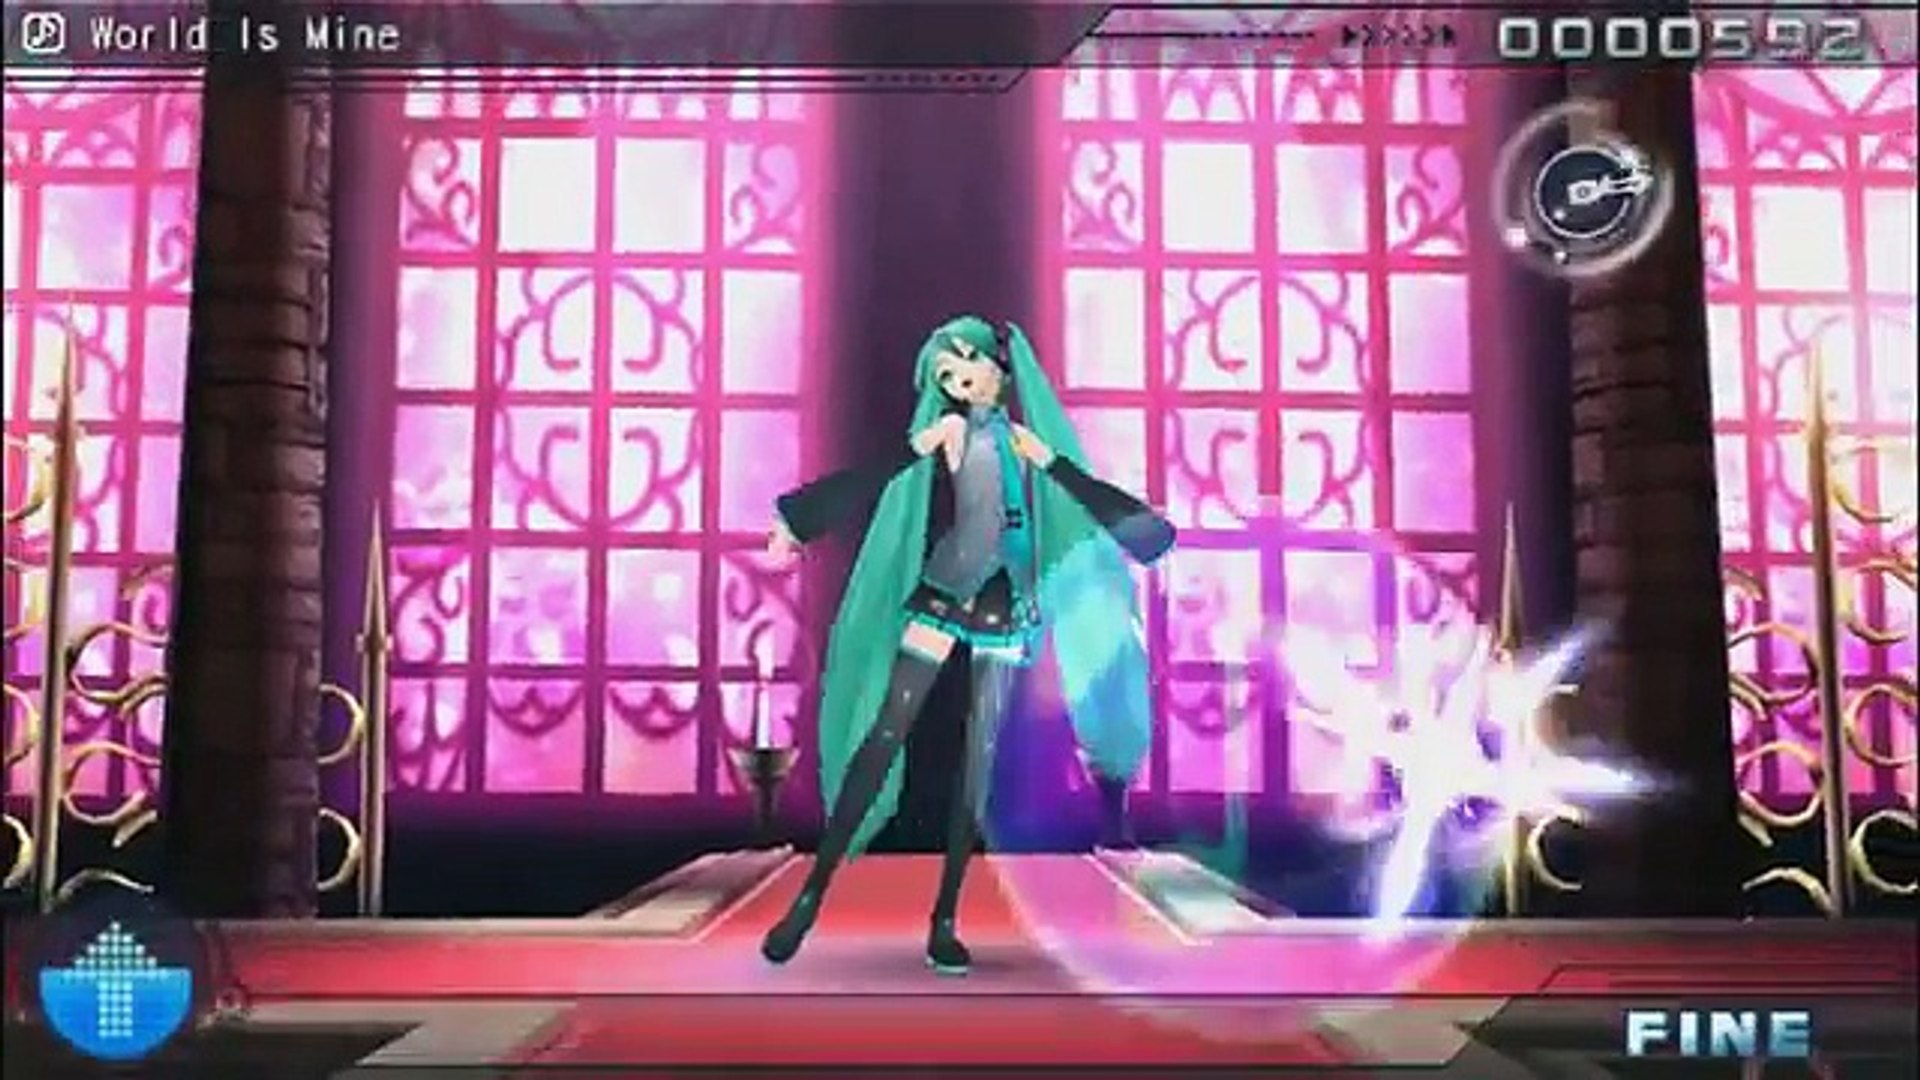 Hatsune Mika Project Diva Psp World Is Mine Gameplay Hd Video Dailymotion